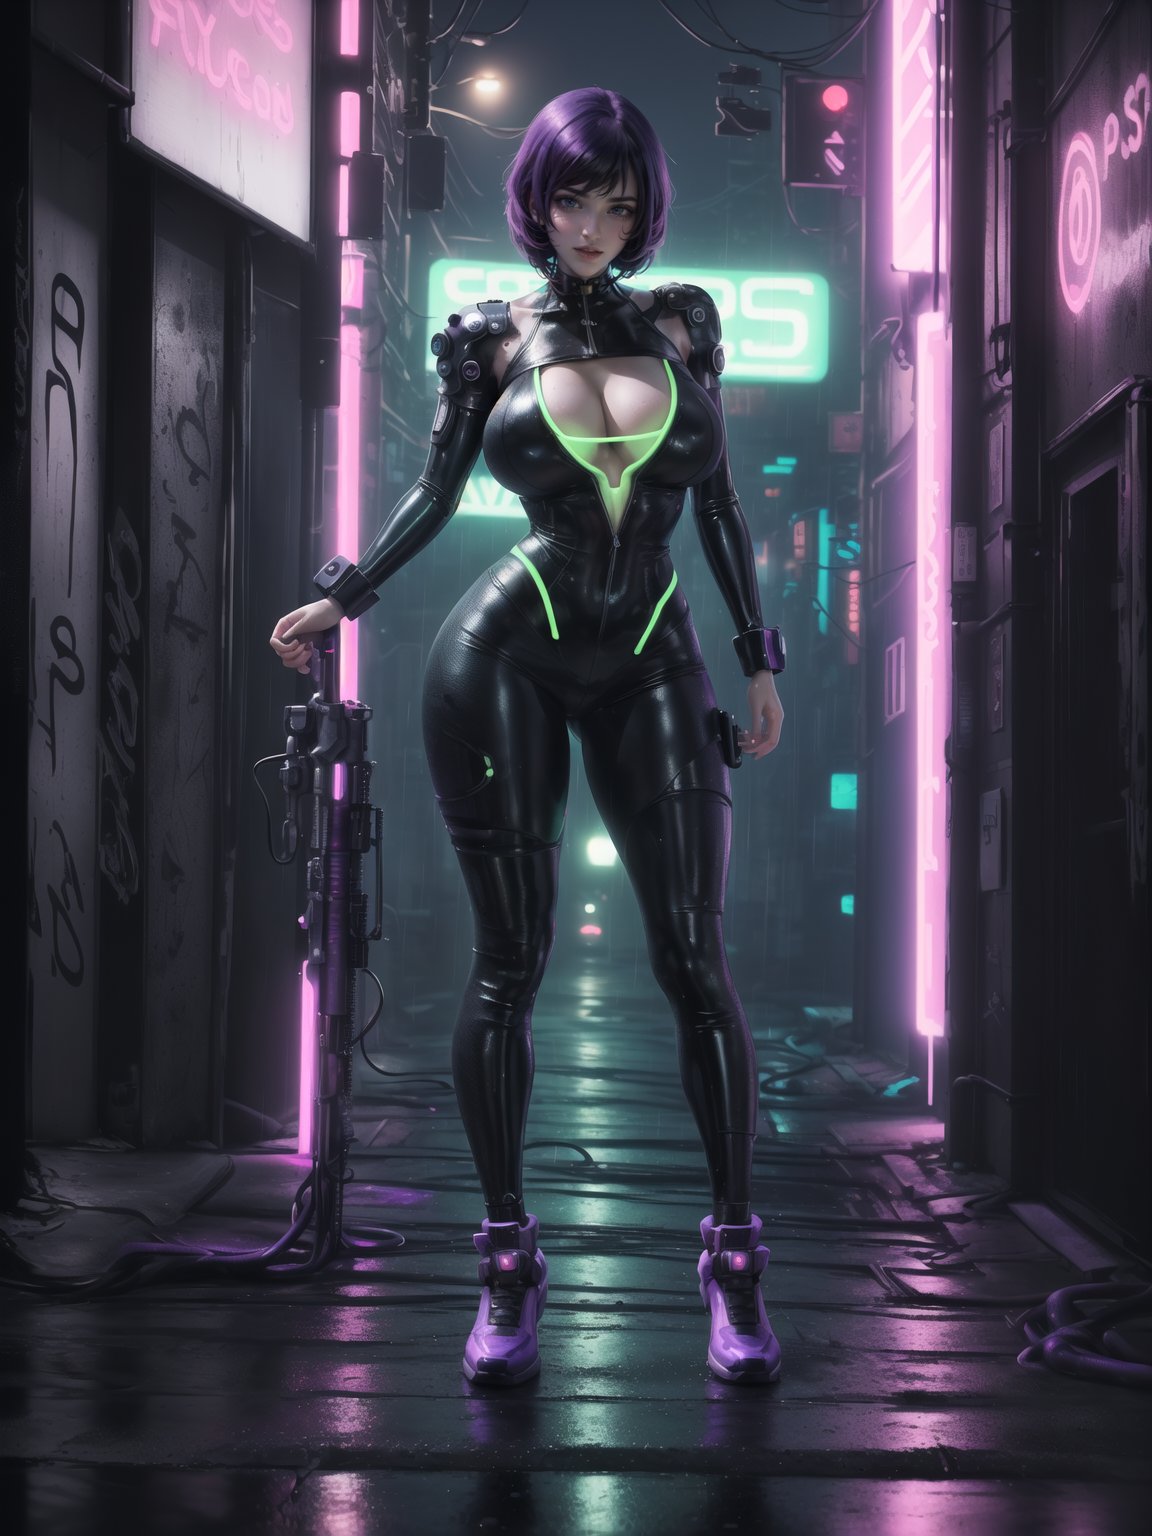 ((Full body):2) {((Solo/Just a 30 year old woman):2)}:{((wearing black cyberpunk costume with neon lights extremely tight and tight on the body, semi transparent):1.5), ((extremely large breasts):1.5), only she has ((very short purple hair, green eyes):1.5), ((looking at viewer, maniacal smile):1.5), she is doing ((erotic pose): 1.5)}; {Background:In a futuristic city raining heavily, (with cars parked on the street):1.5)}, Hyperrealism, 16k, ((best quality, high details):1.4), anatomically correct, masterpiece, UHD